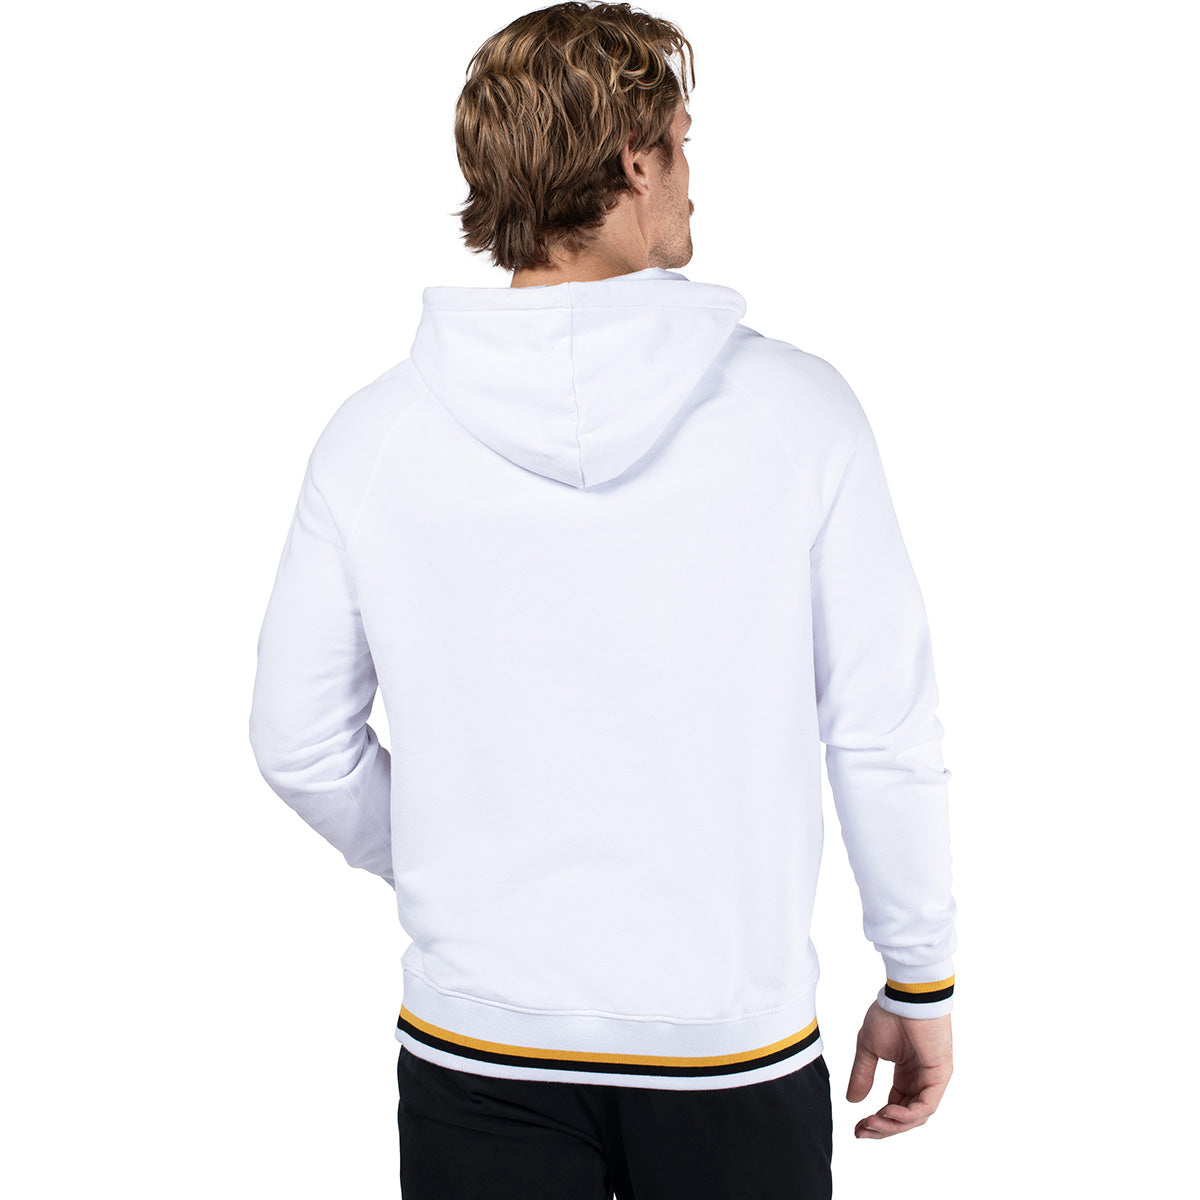 Spittin Chiclets Patch Hoodie